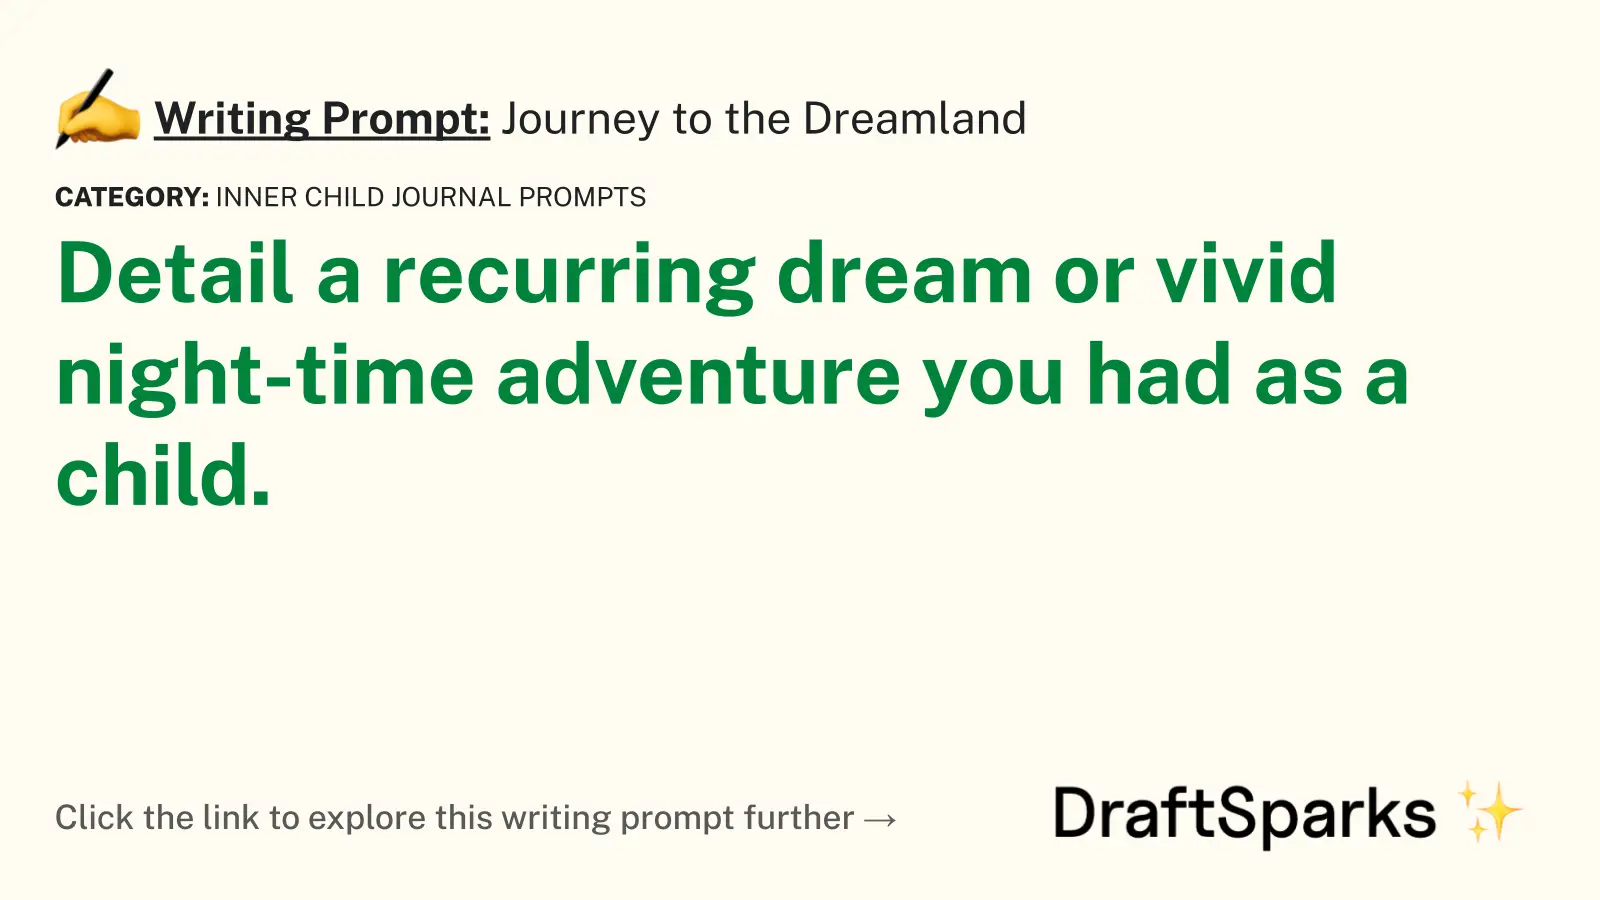 Journey to the Dreamland